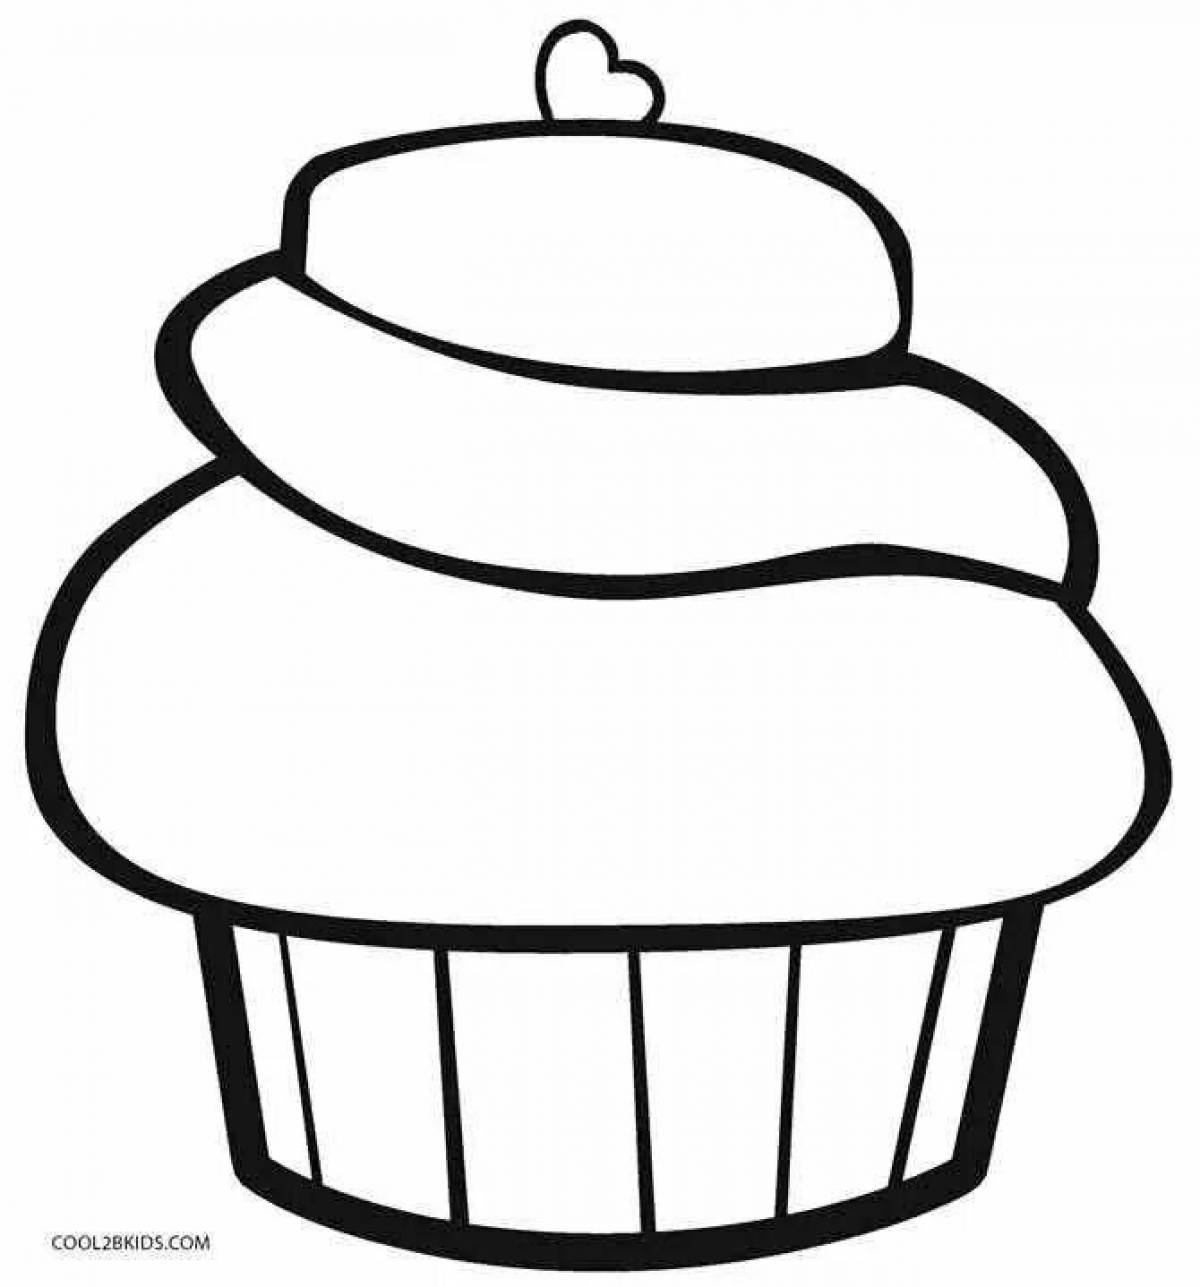 Coloring page cupcakes for kids